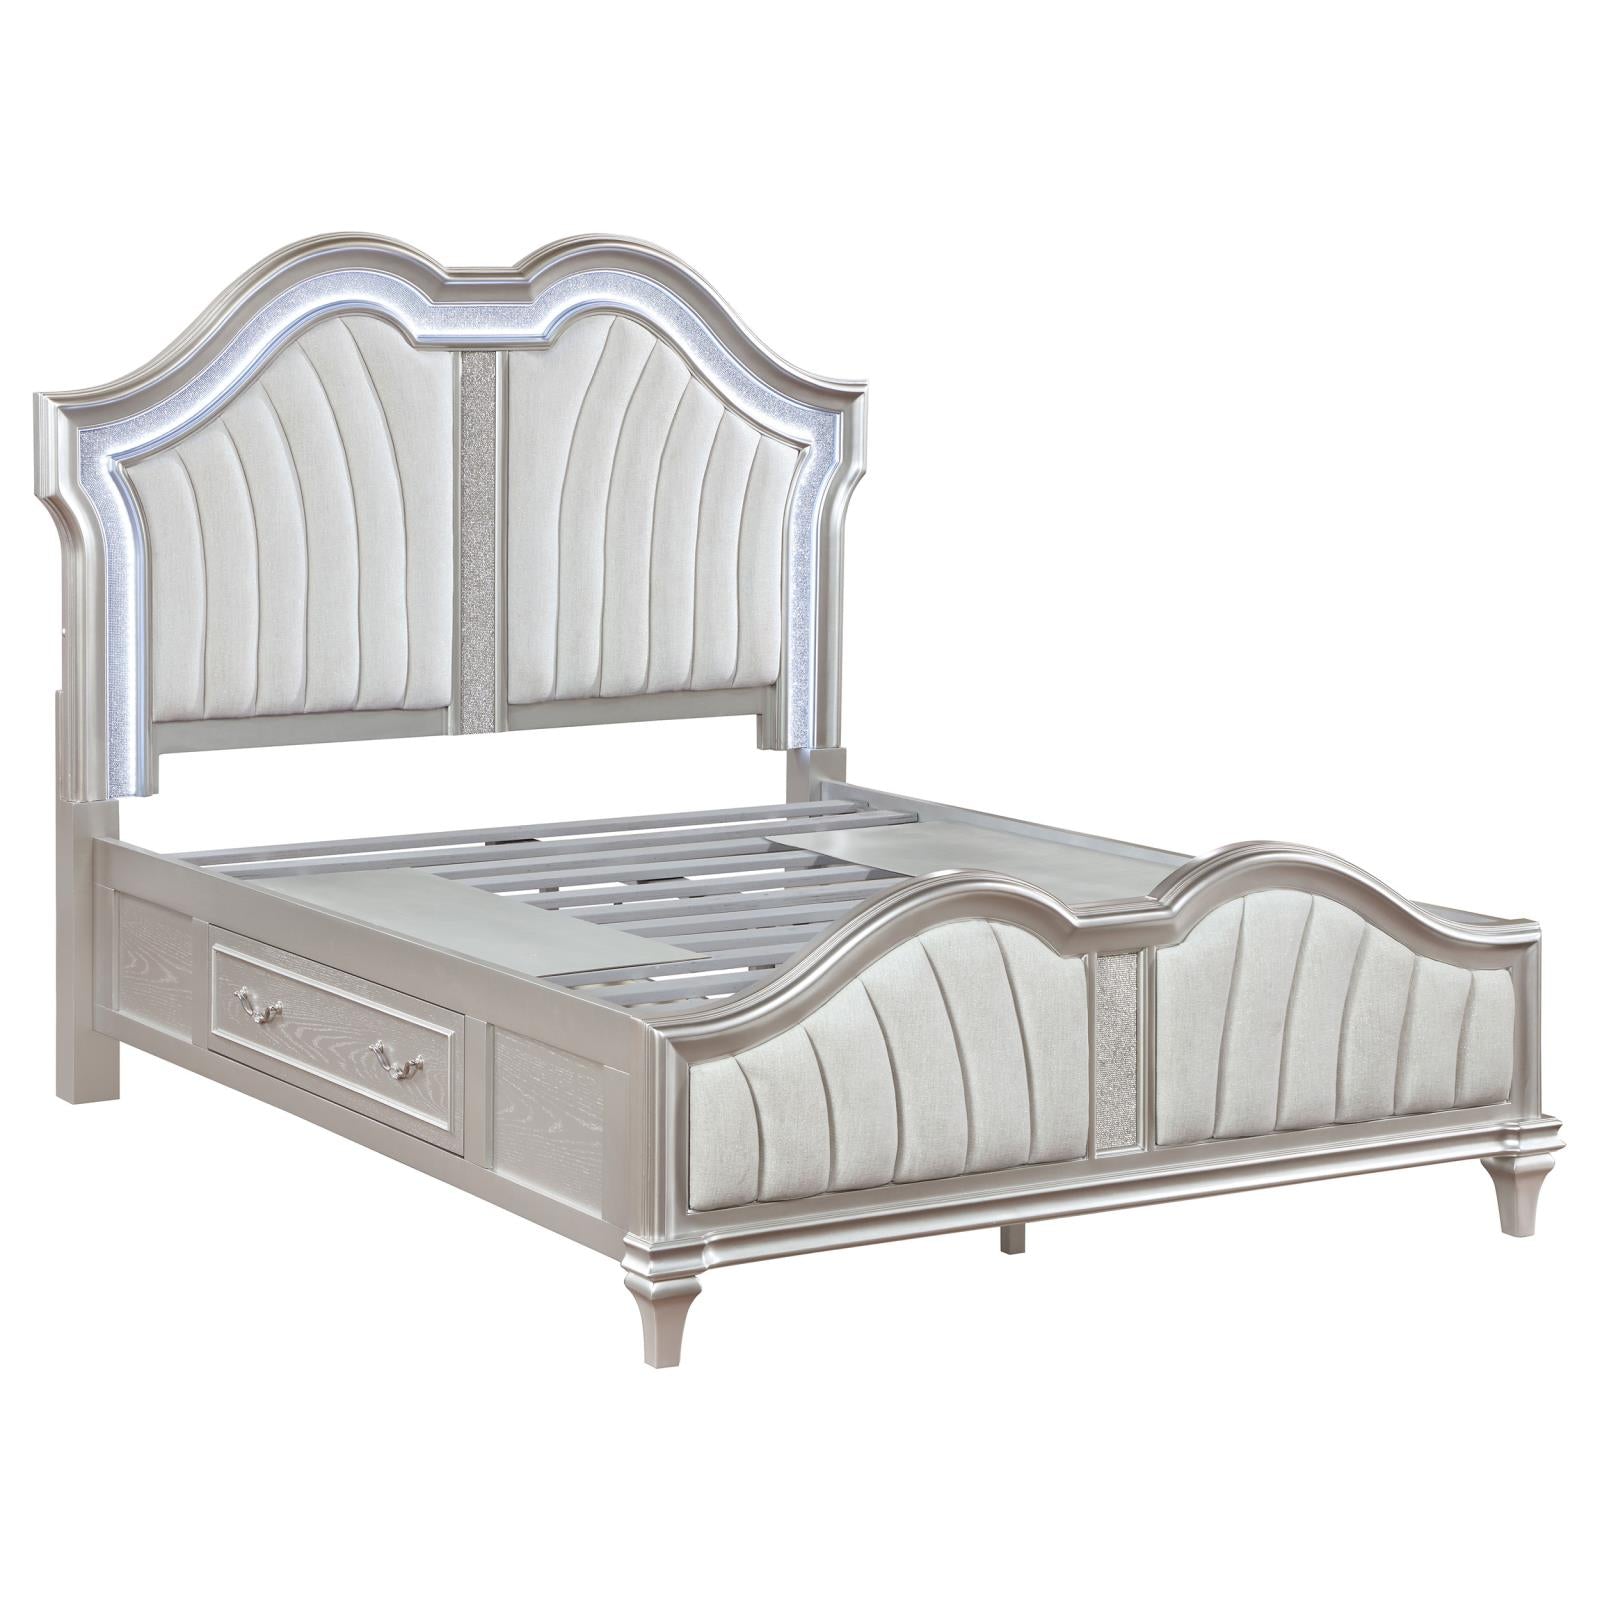 Evangeline Evangeline Queen Storage Bed With LED Headboard Silver Oak And Ivory 223390Q